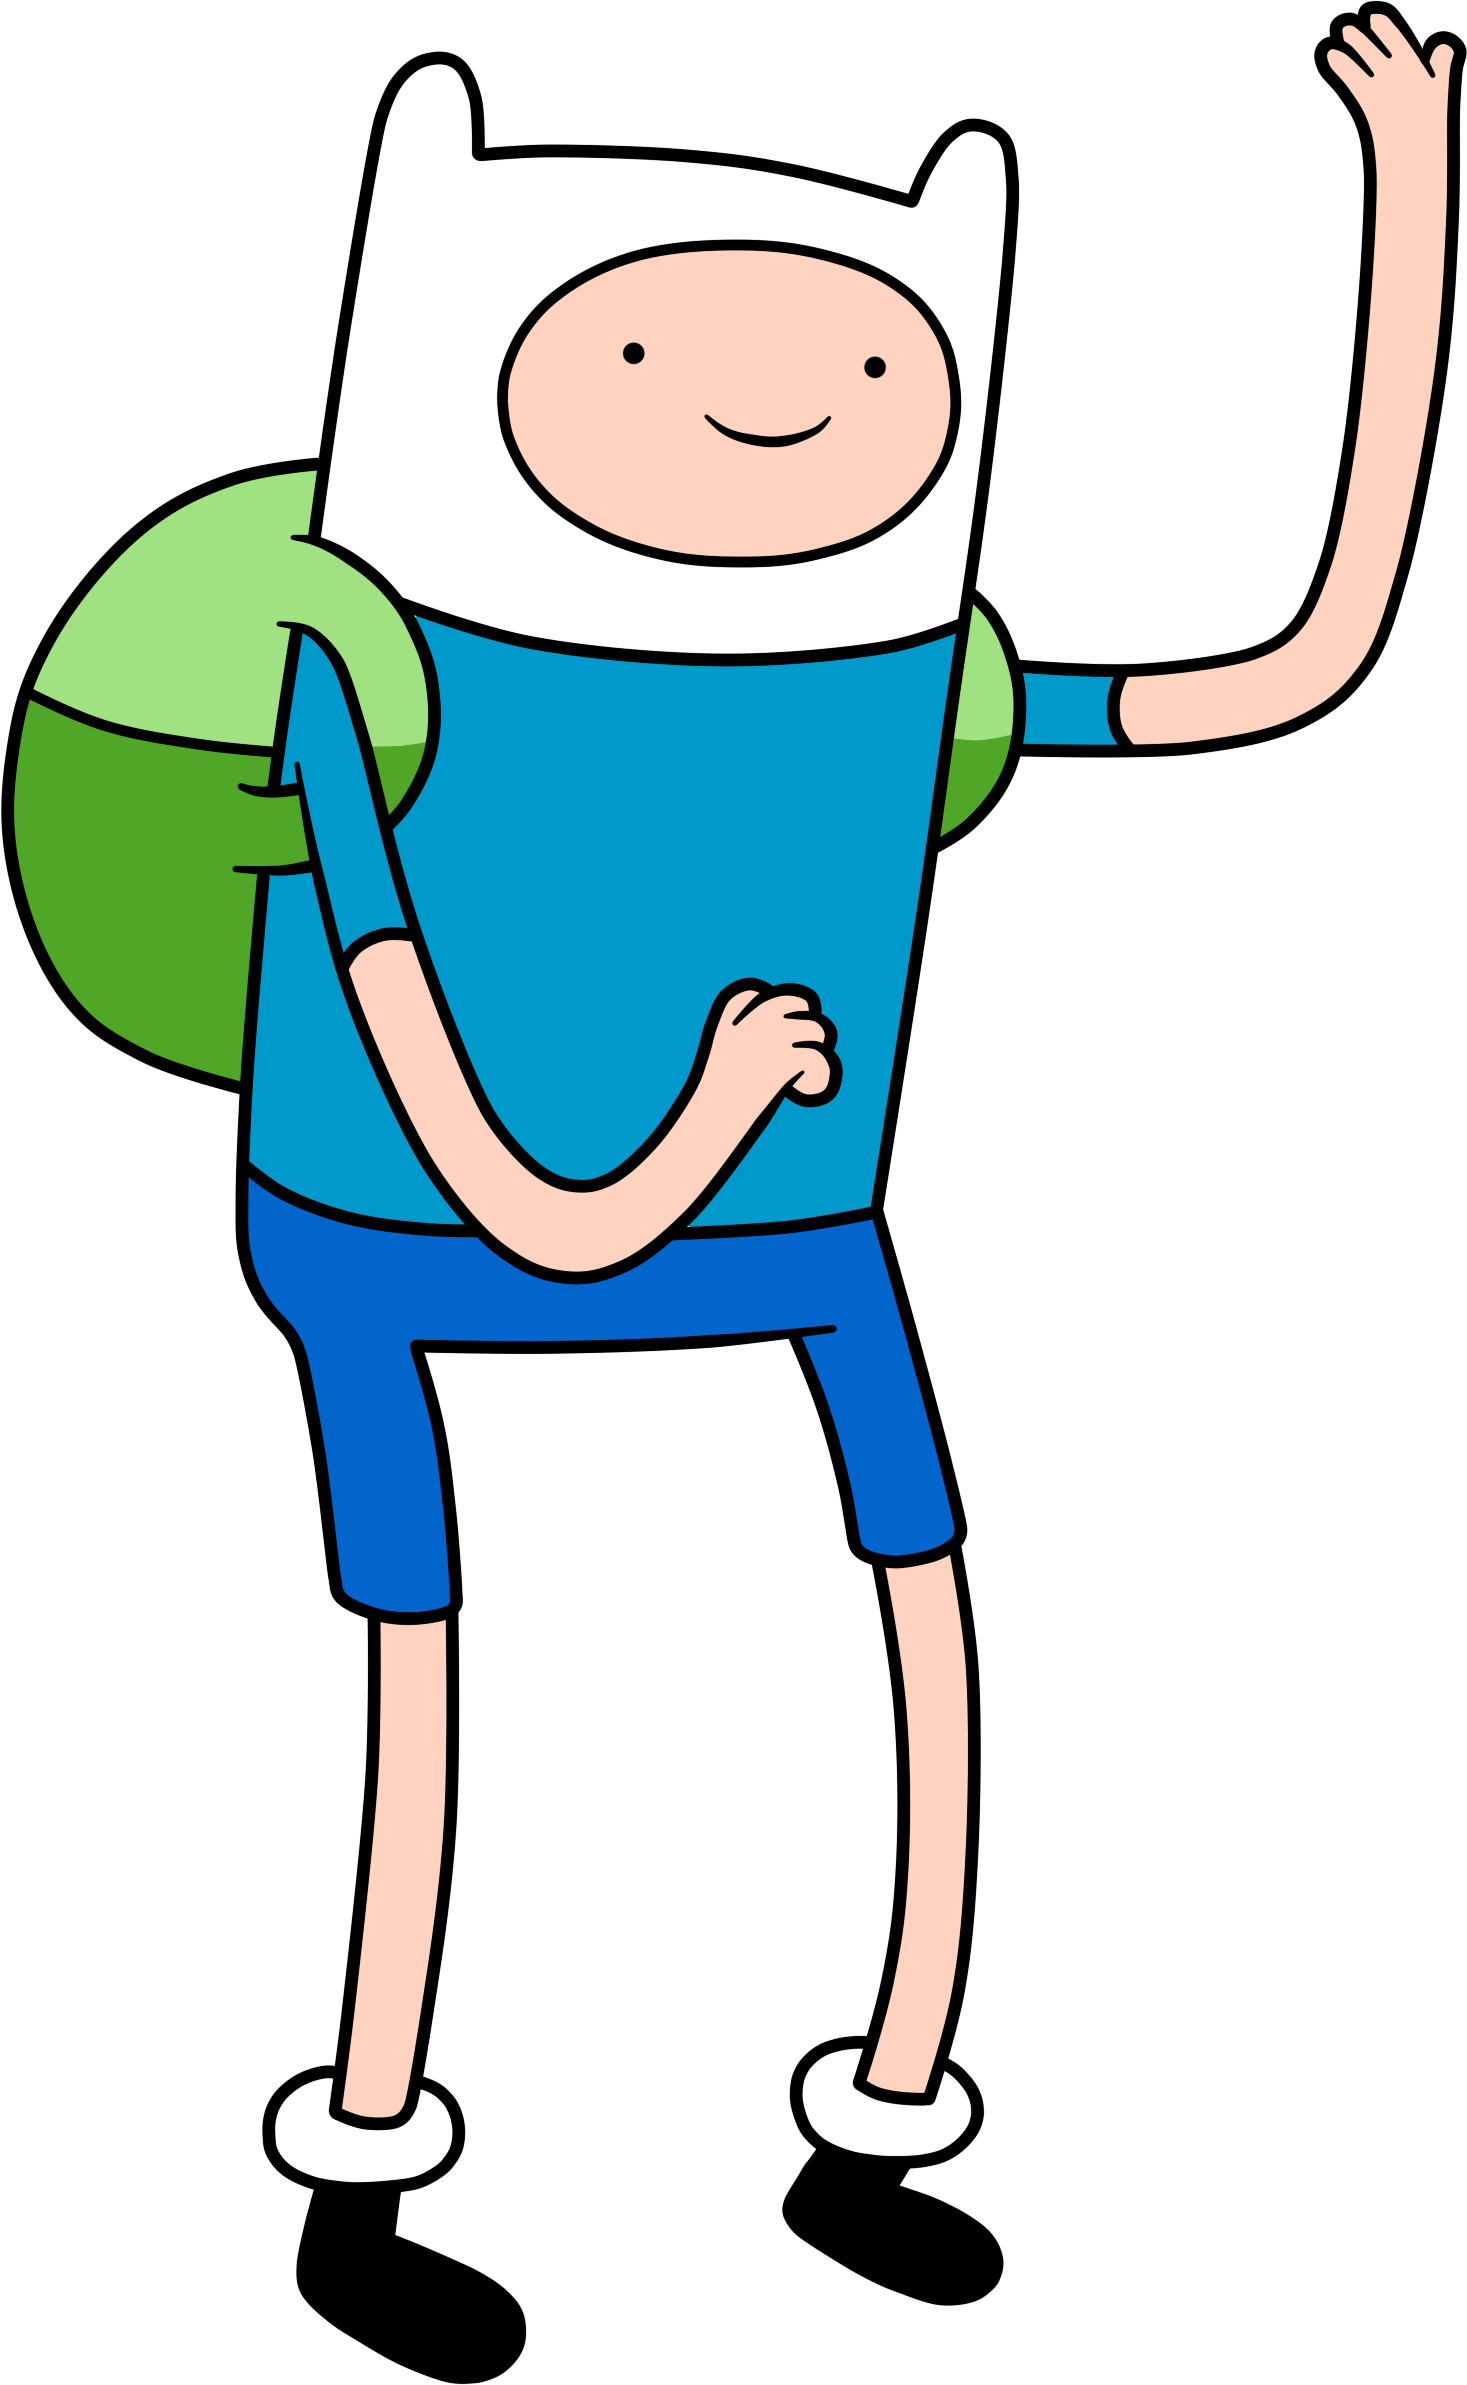 Image result for finn the human